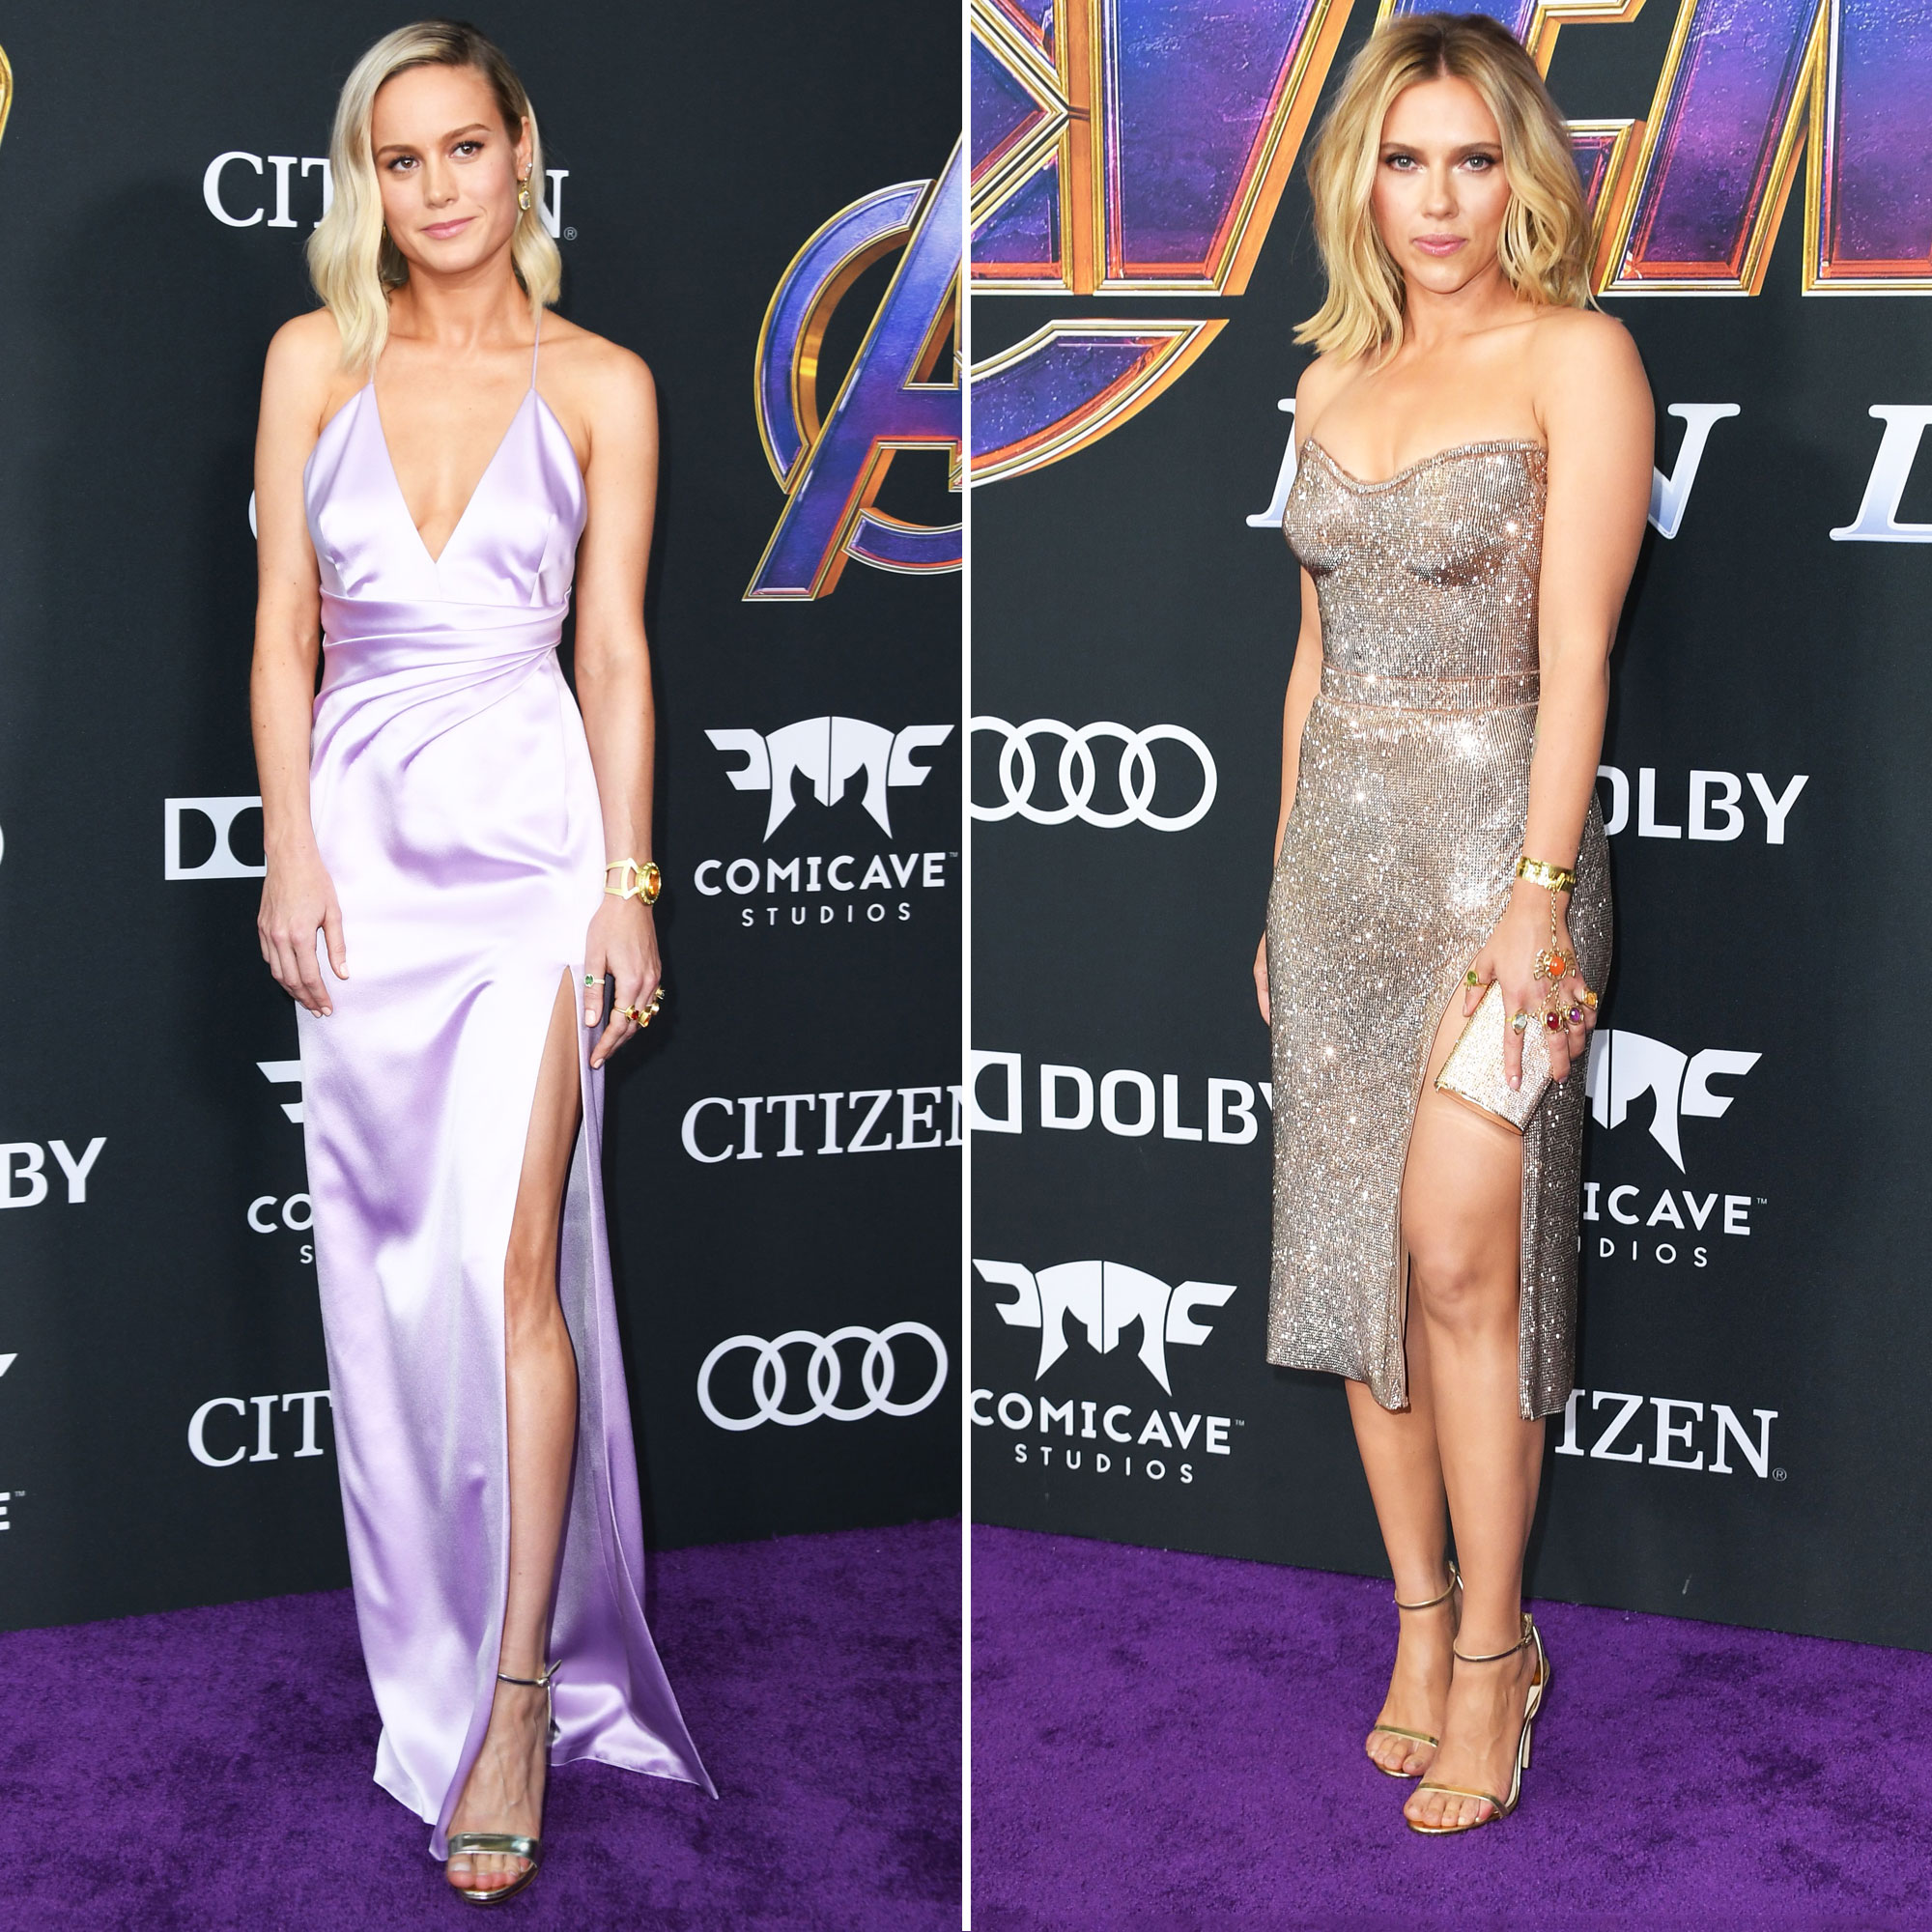 Brie Larson and ScarJo Rock Infinity Gauntlet Rings on the %C5%92Avengers%C2%B9 Red Carpet